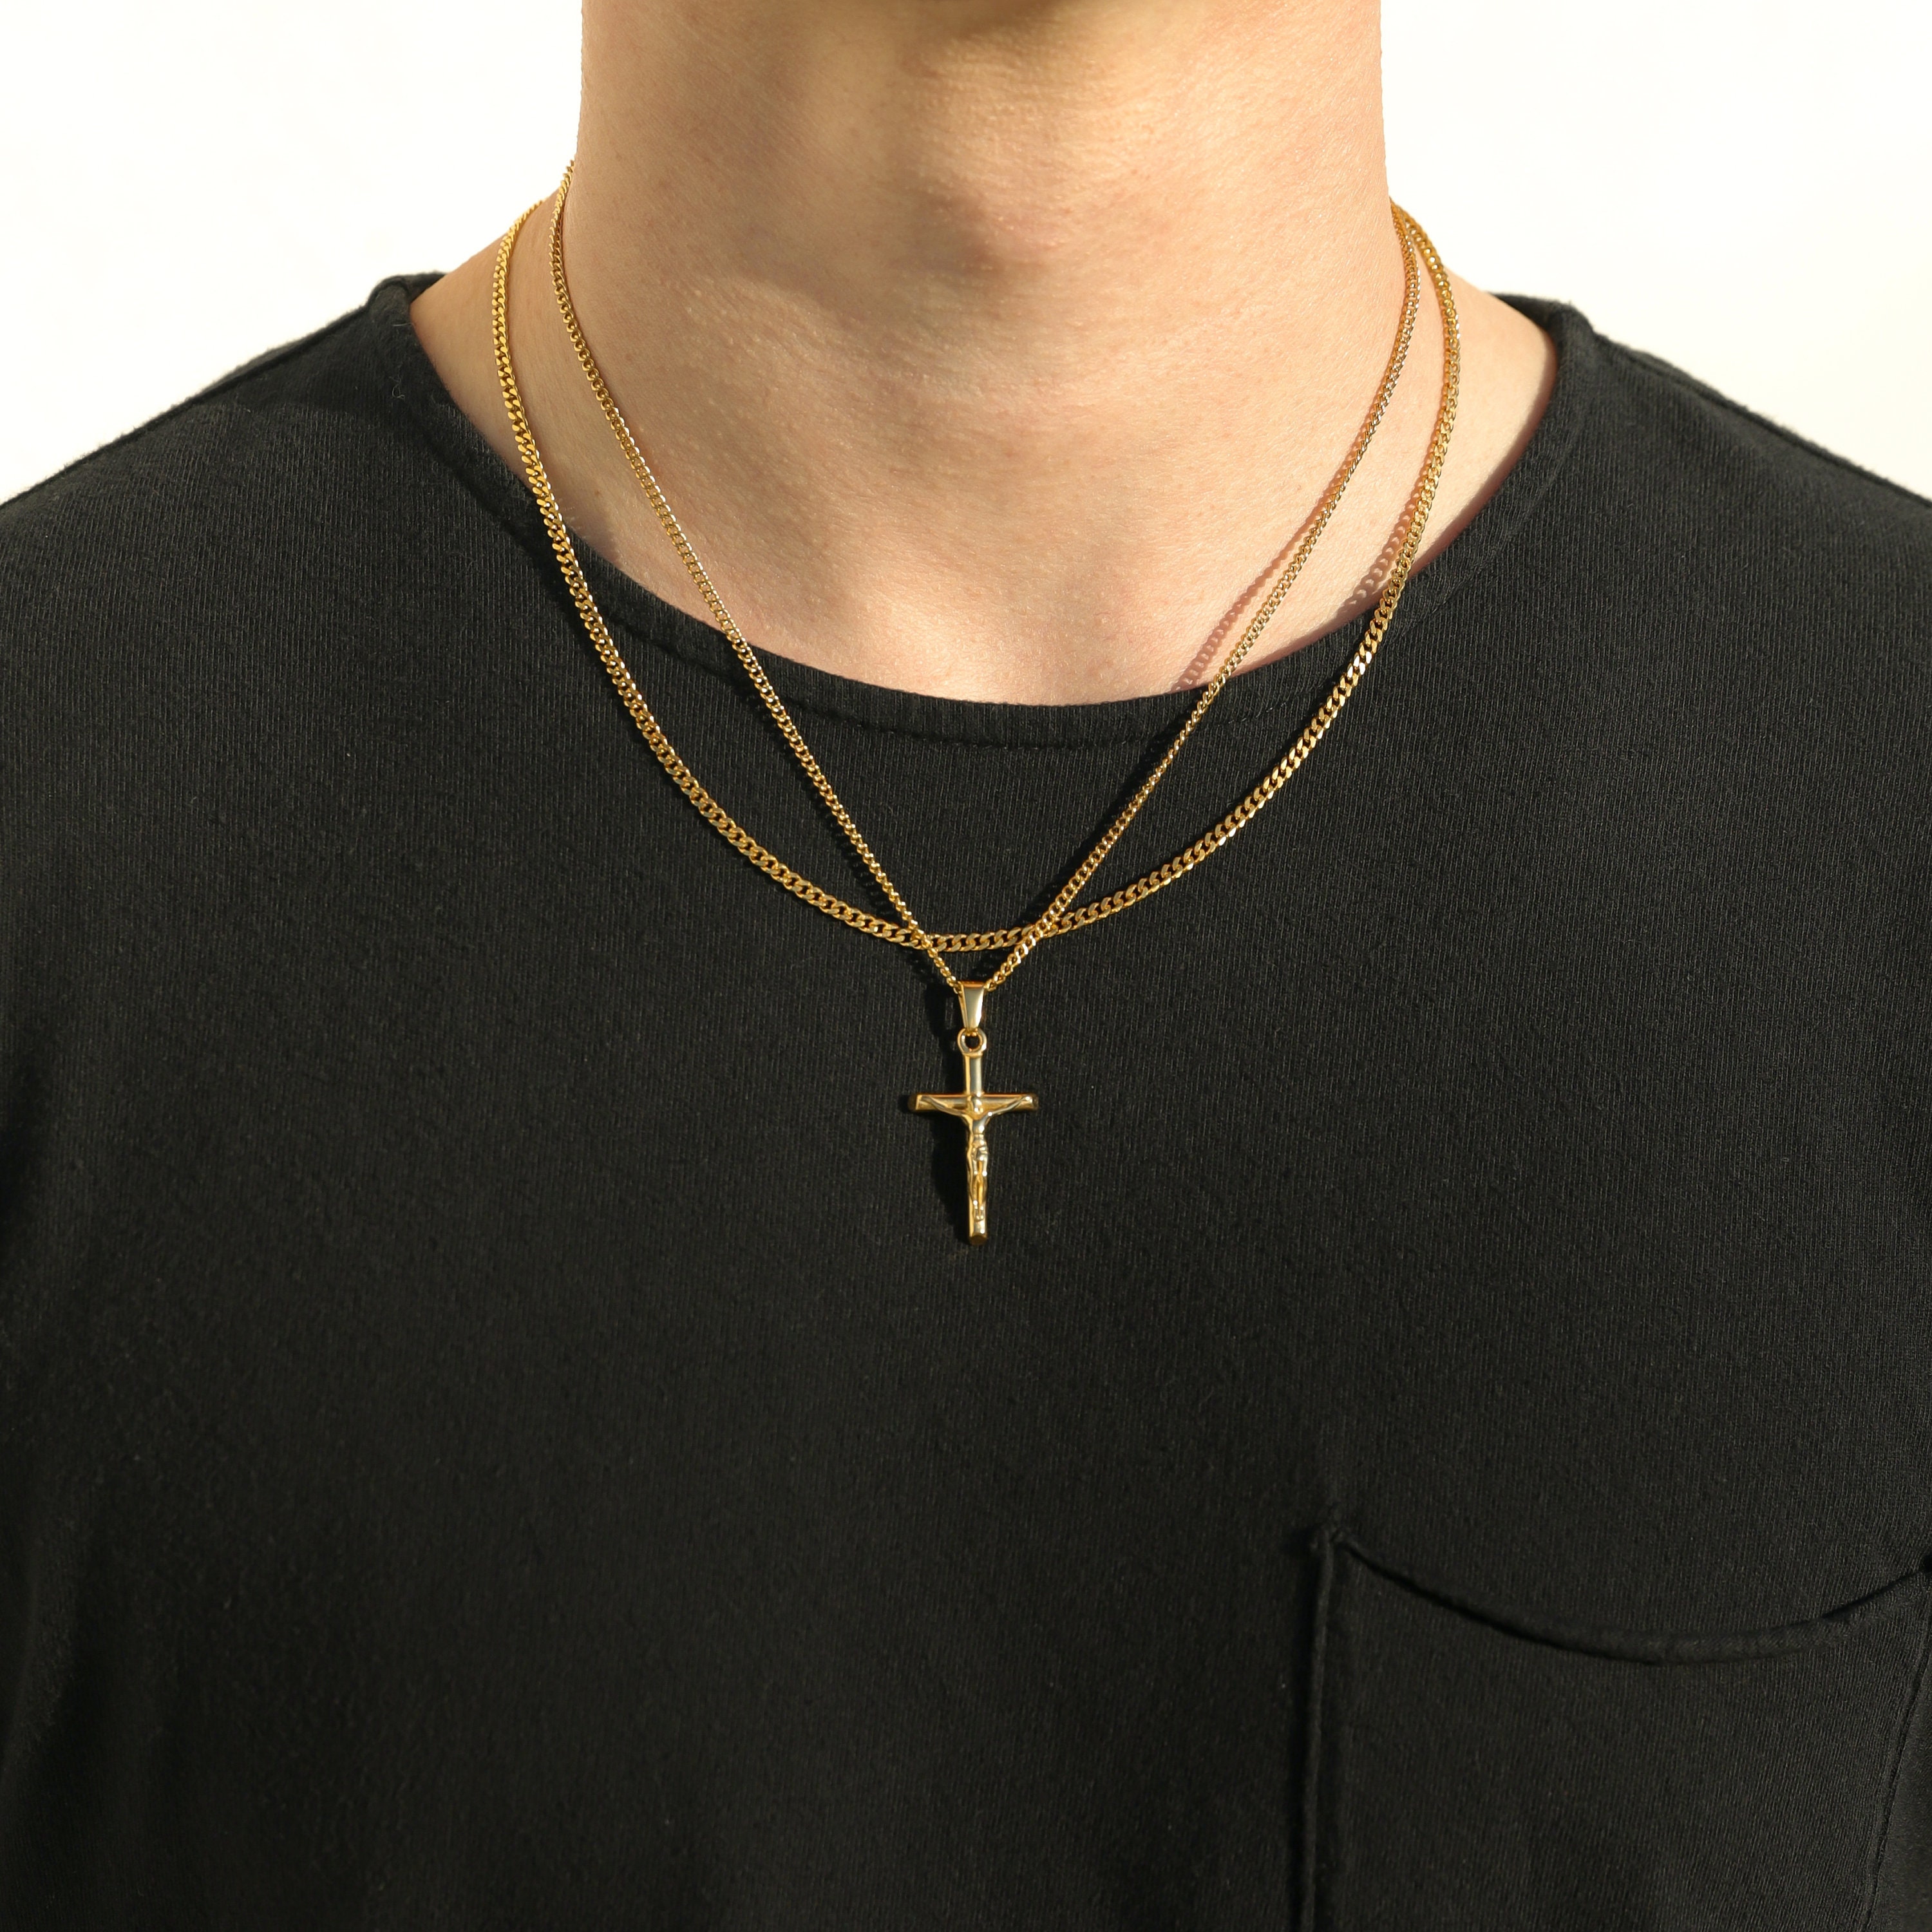 HZMAN Stainless Steel Mens Womens Cross Necklace India | Ubuy